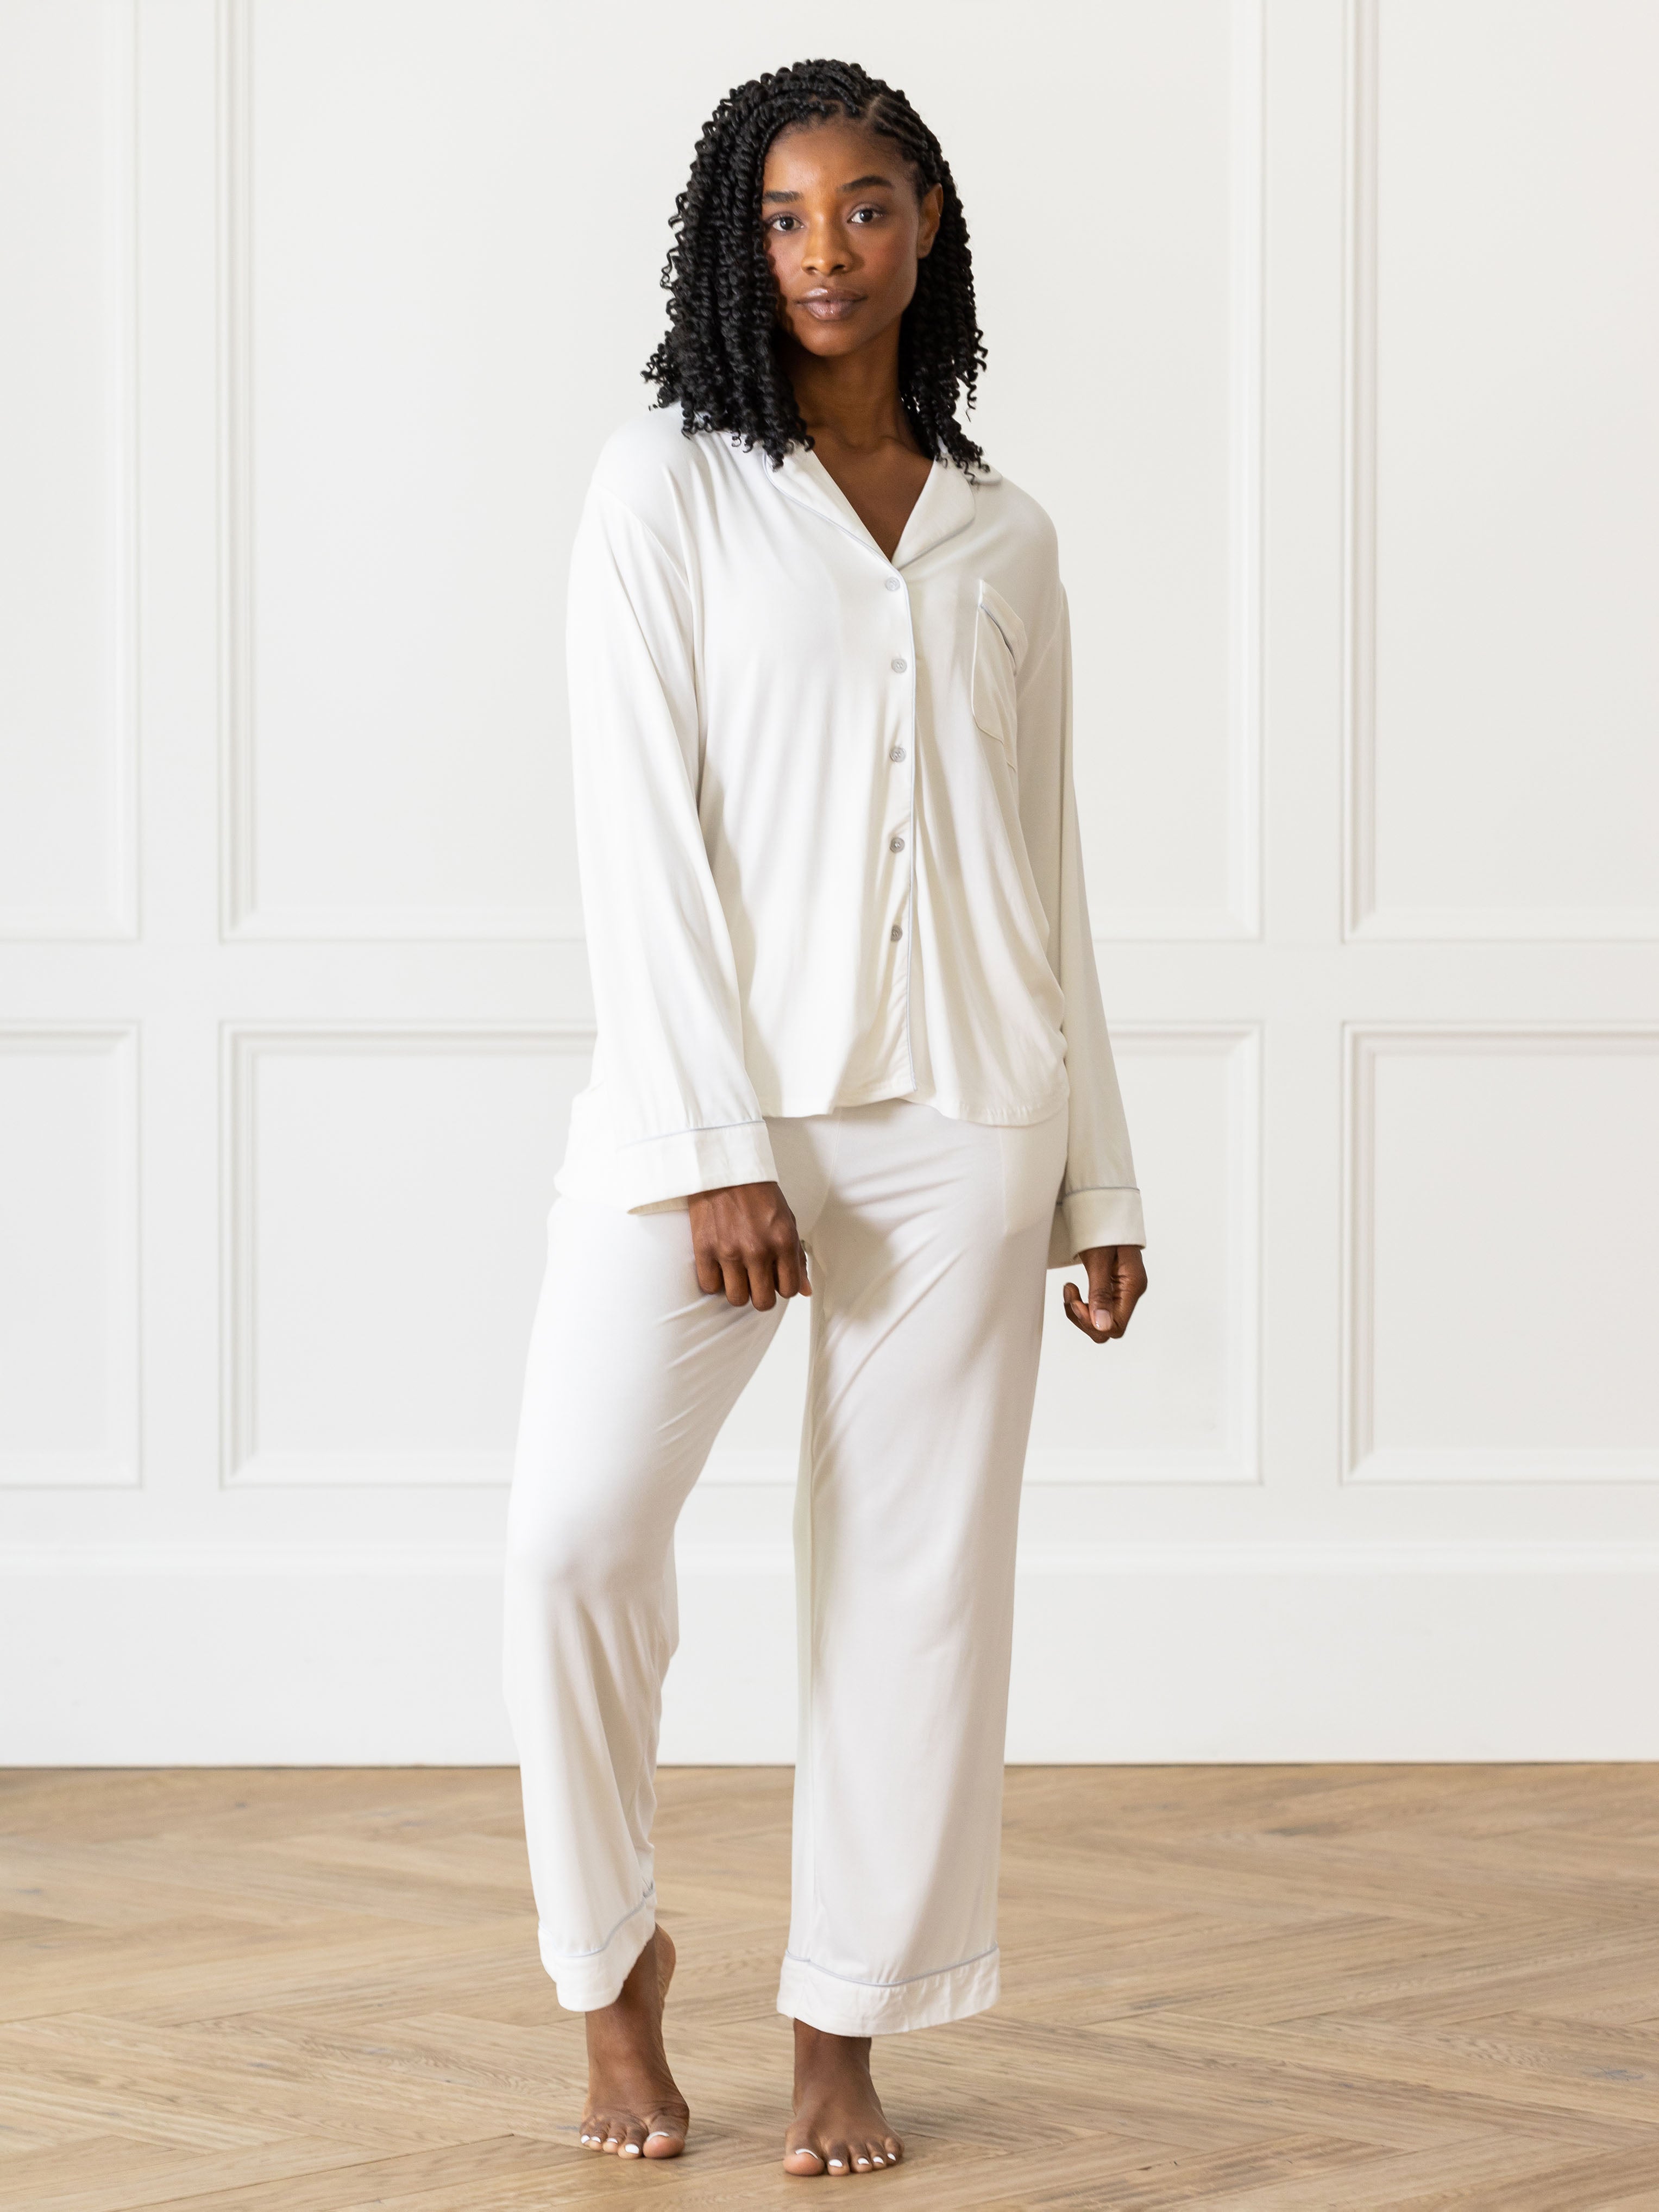 Ivory Long Sleeve Pajama Set modeled by a woman. The photo was taken in a high contrast setting, showing off the colors and lines of the pajamas. |Color:Ivory